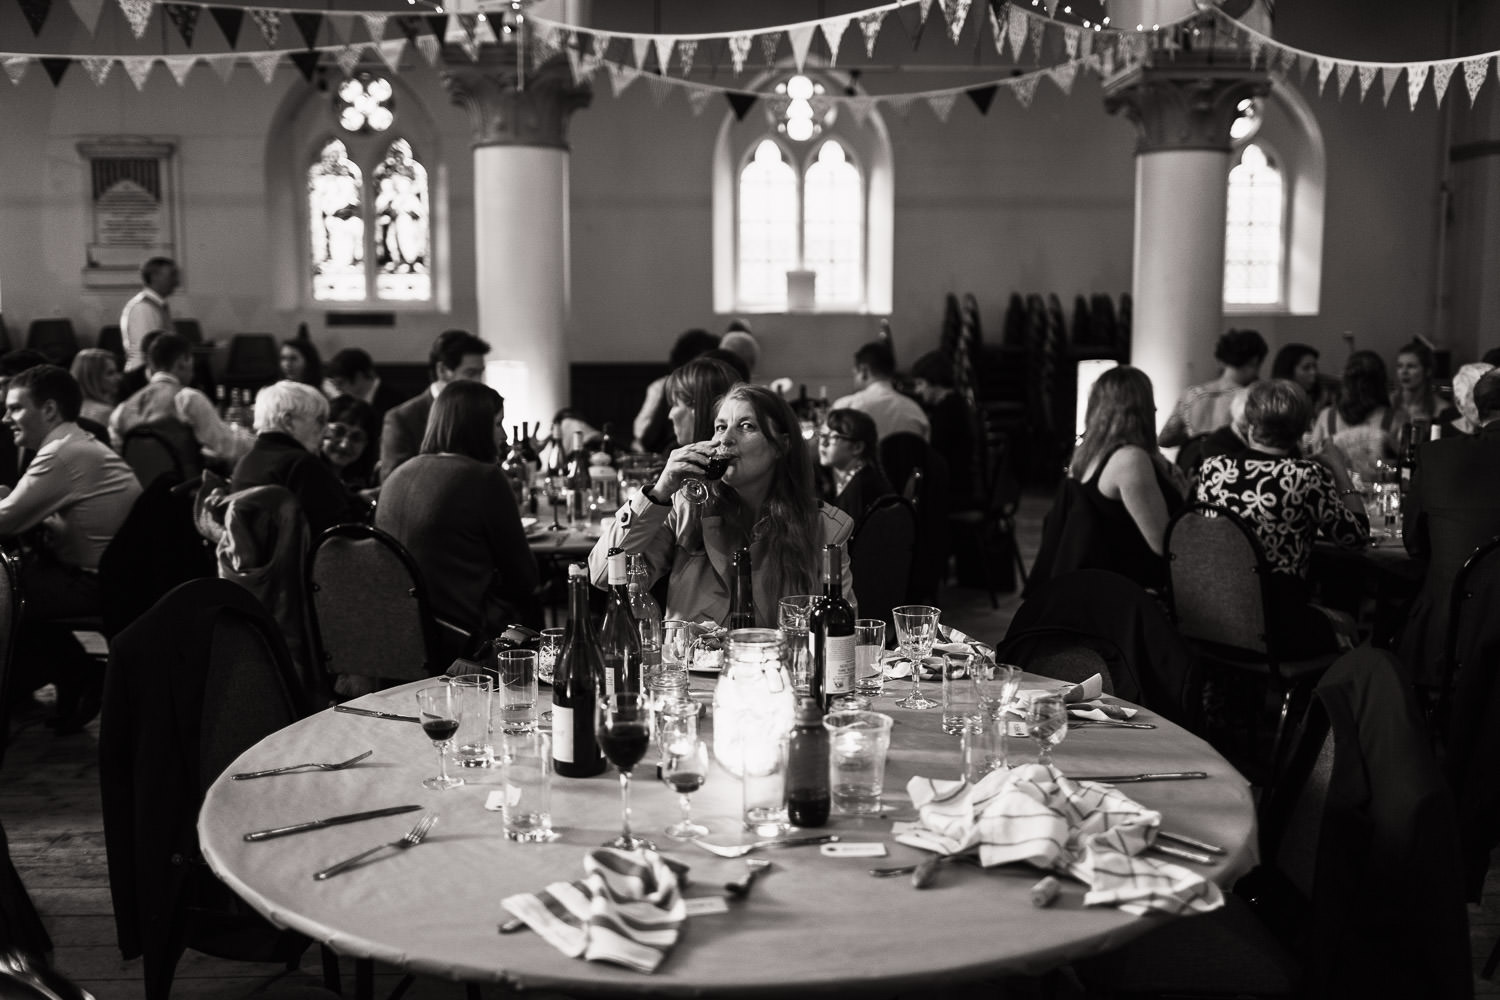 A woman is sat alone at a round table while the other people get their food. She's looking at the camera and drinking a glass of wine. A reportage style unposed wedding photograph. At the Elmgrove Centre.